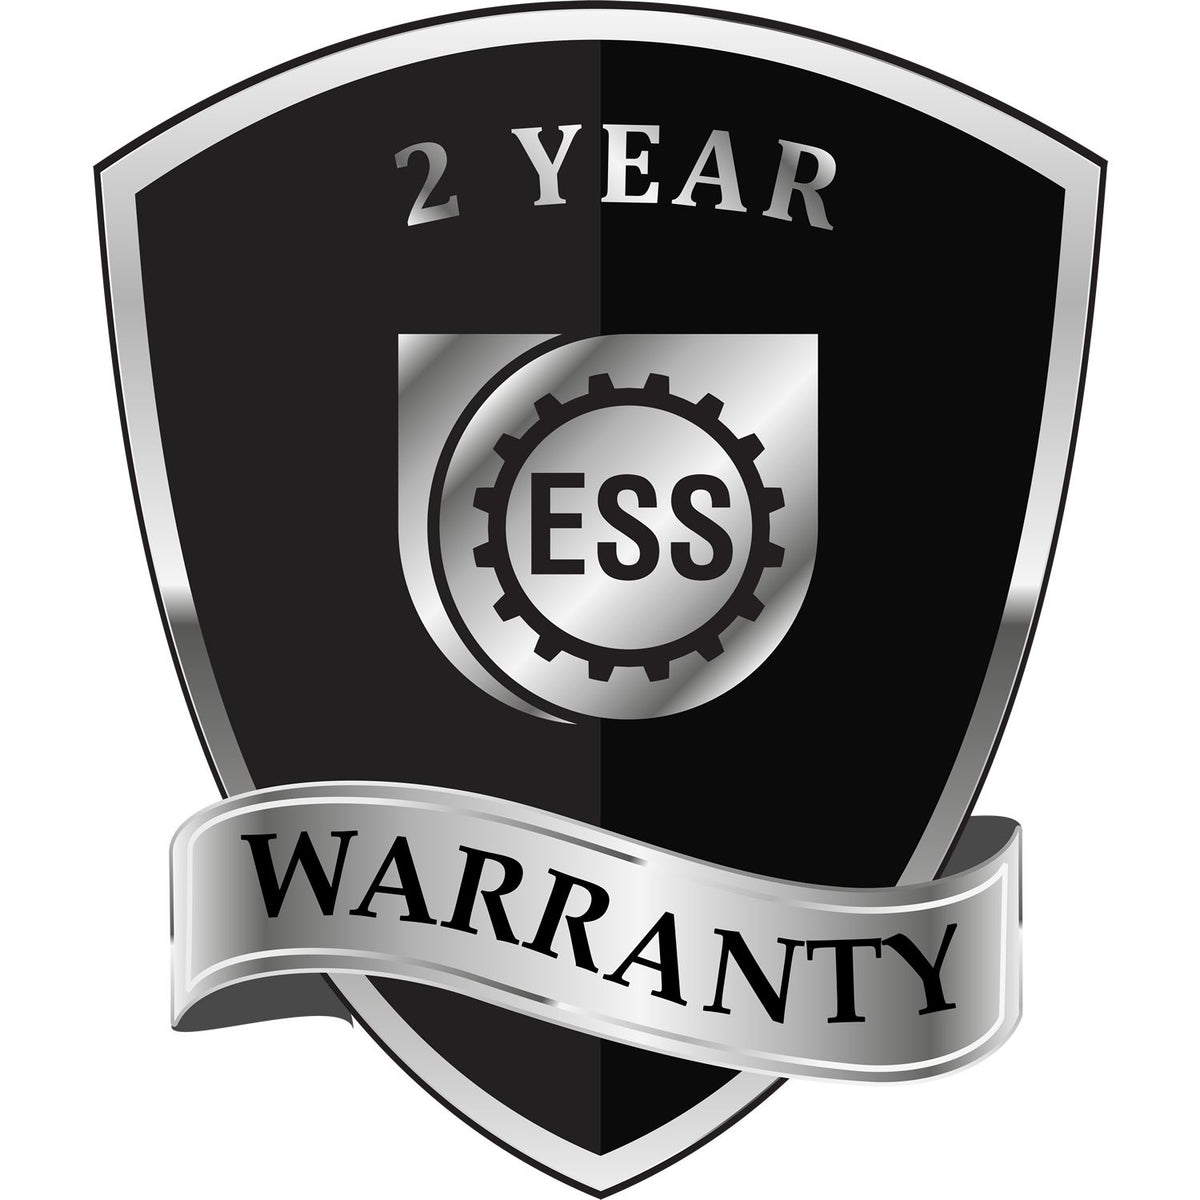 A black and silver badge or emblem showing warranty information for the Hybrid Hawaii Geologist Seal